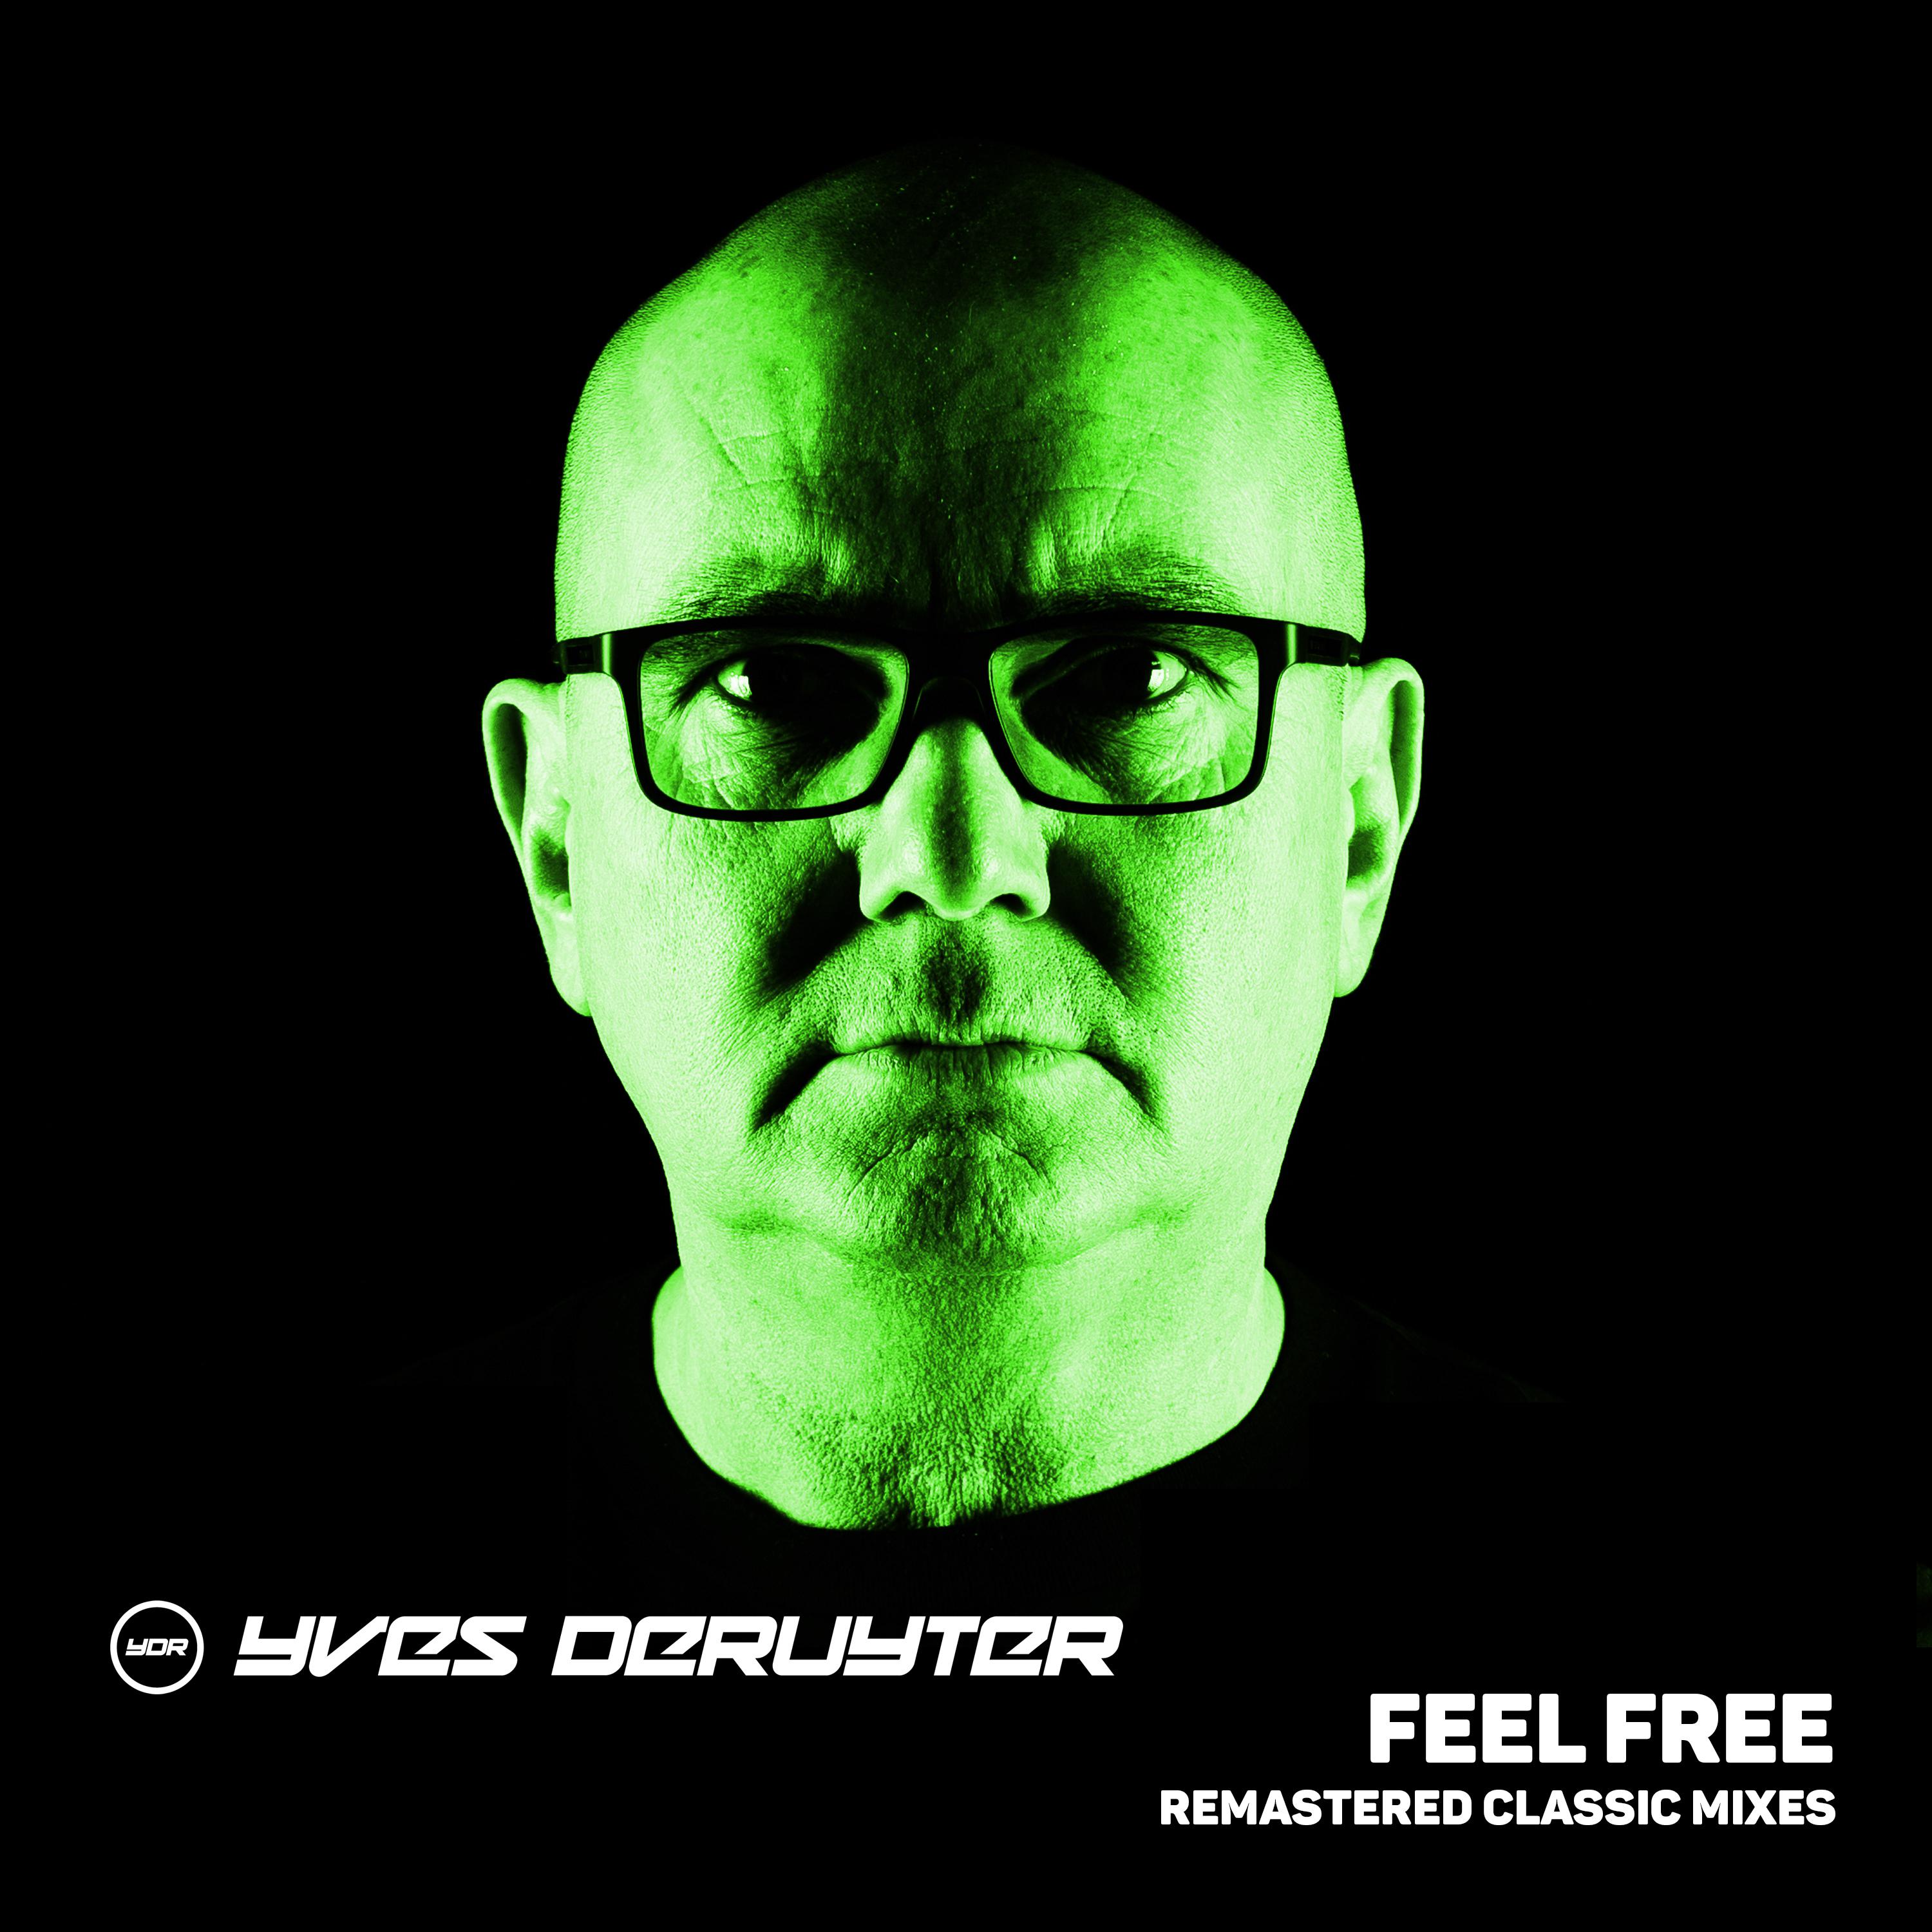 Yves Deruyter - Feel Free (Remastered Remix)